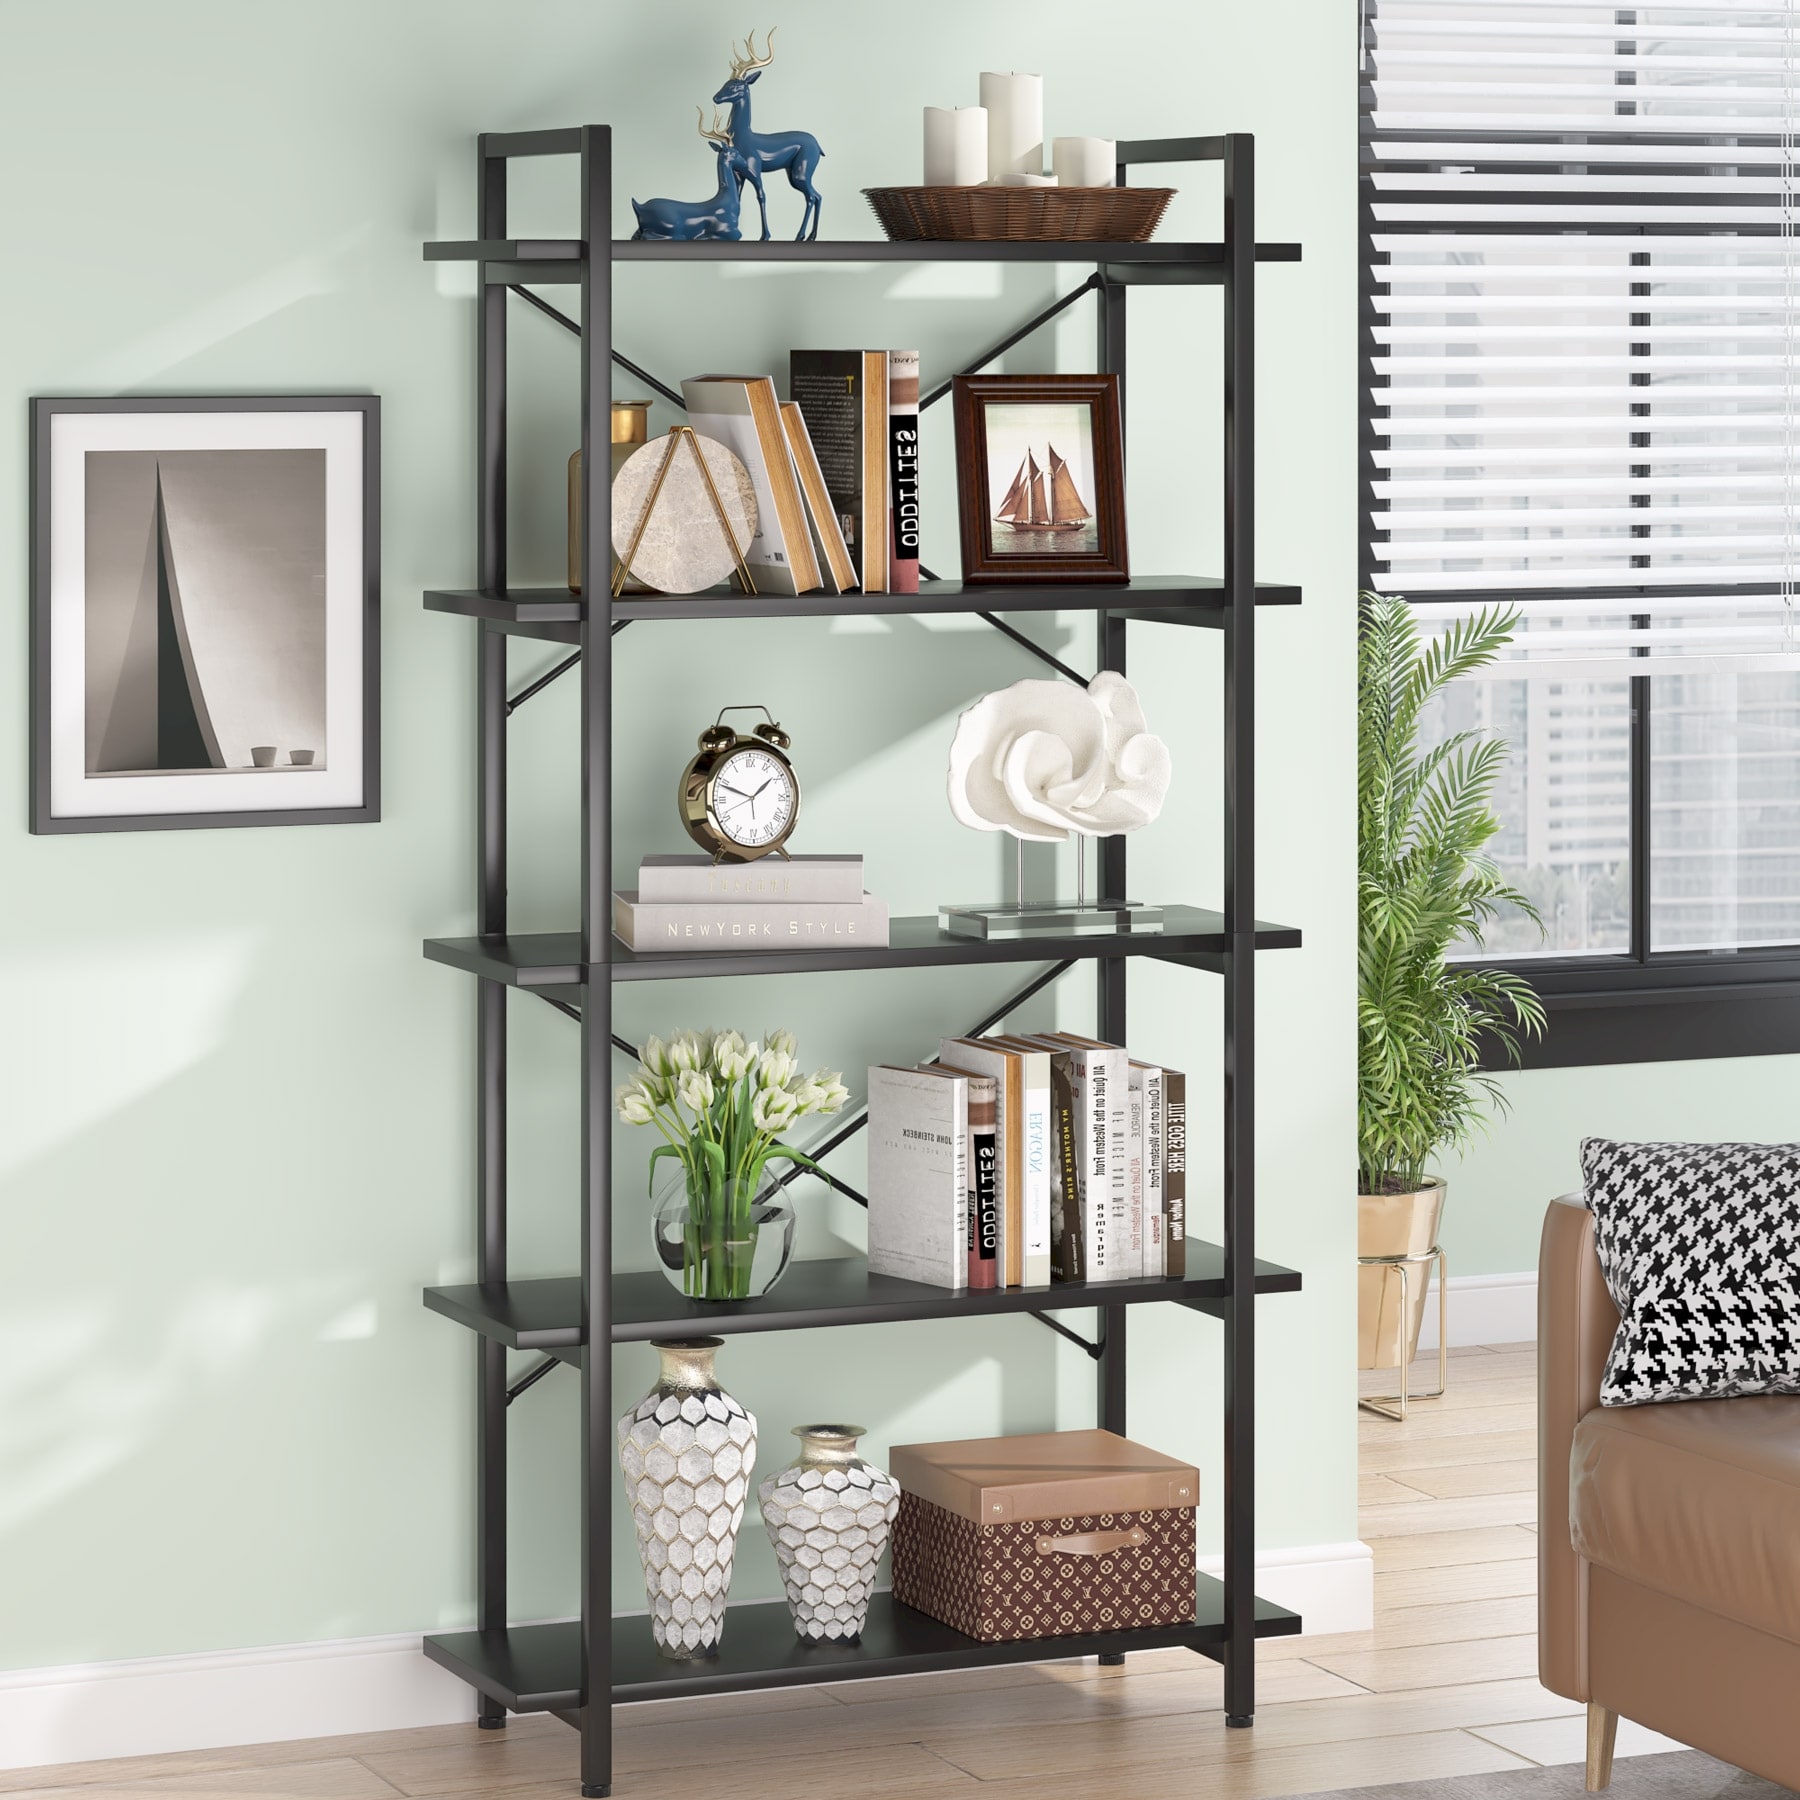 https://ak1.ostkcdn.com/images/products/is/images/direct/71ce2f0989825fe300430aad3ca7e6f50cce96cb/5-Tier-Bookshelf%2C-White-Bookcase-with-Metal-Frame%2C-Modern-Tall-Book-Shelf-Unit-for-Living-Room%2C-Study%2C-Home-Office.jpg